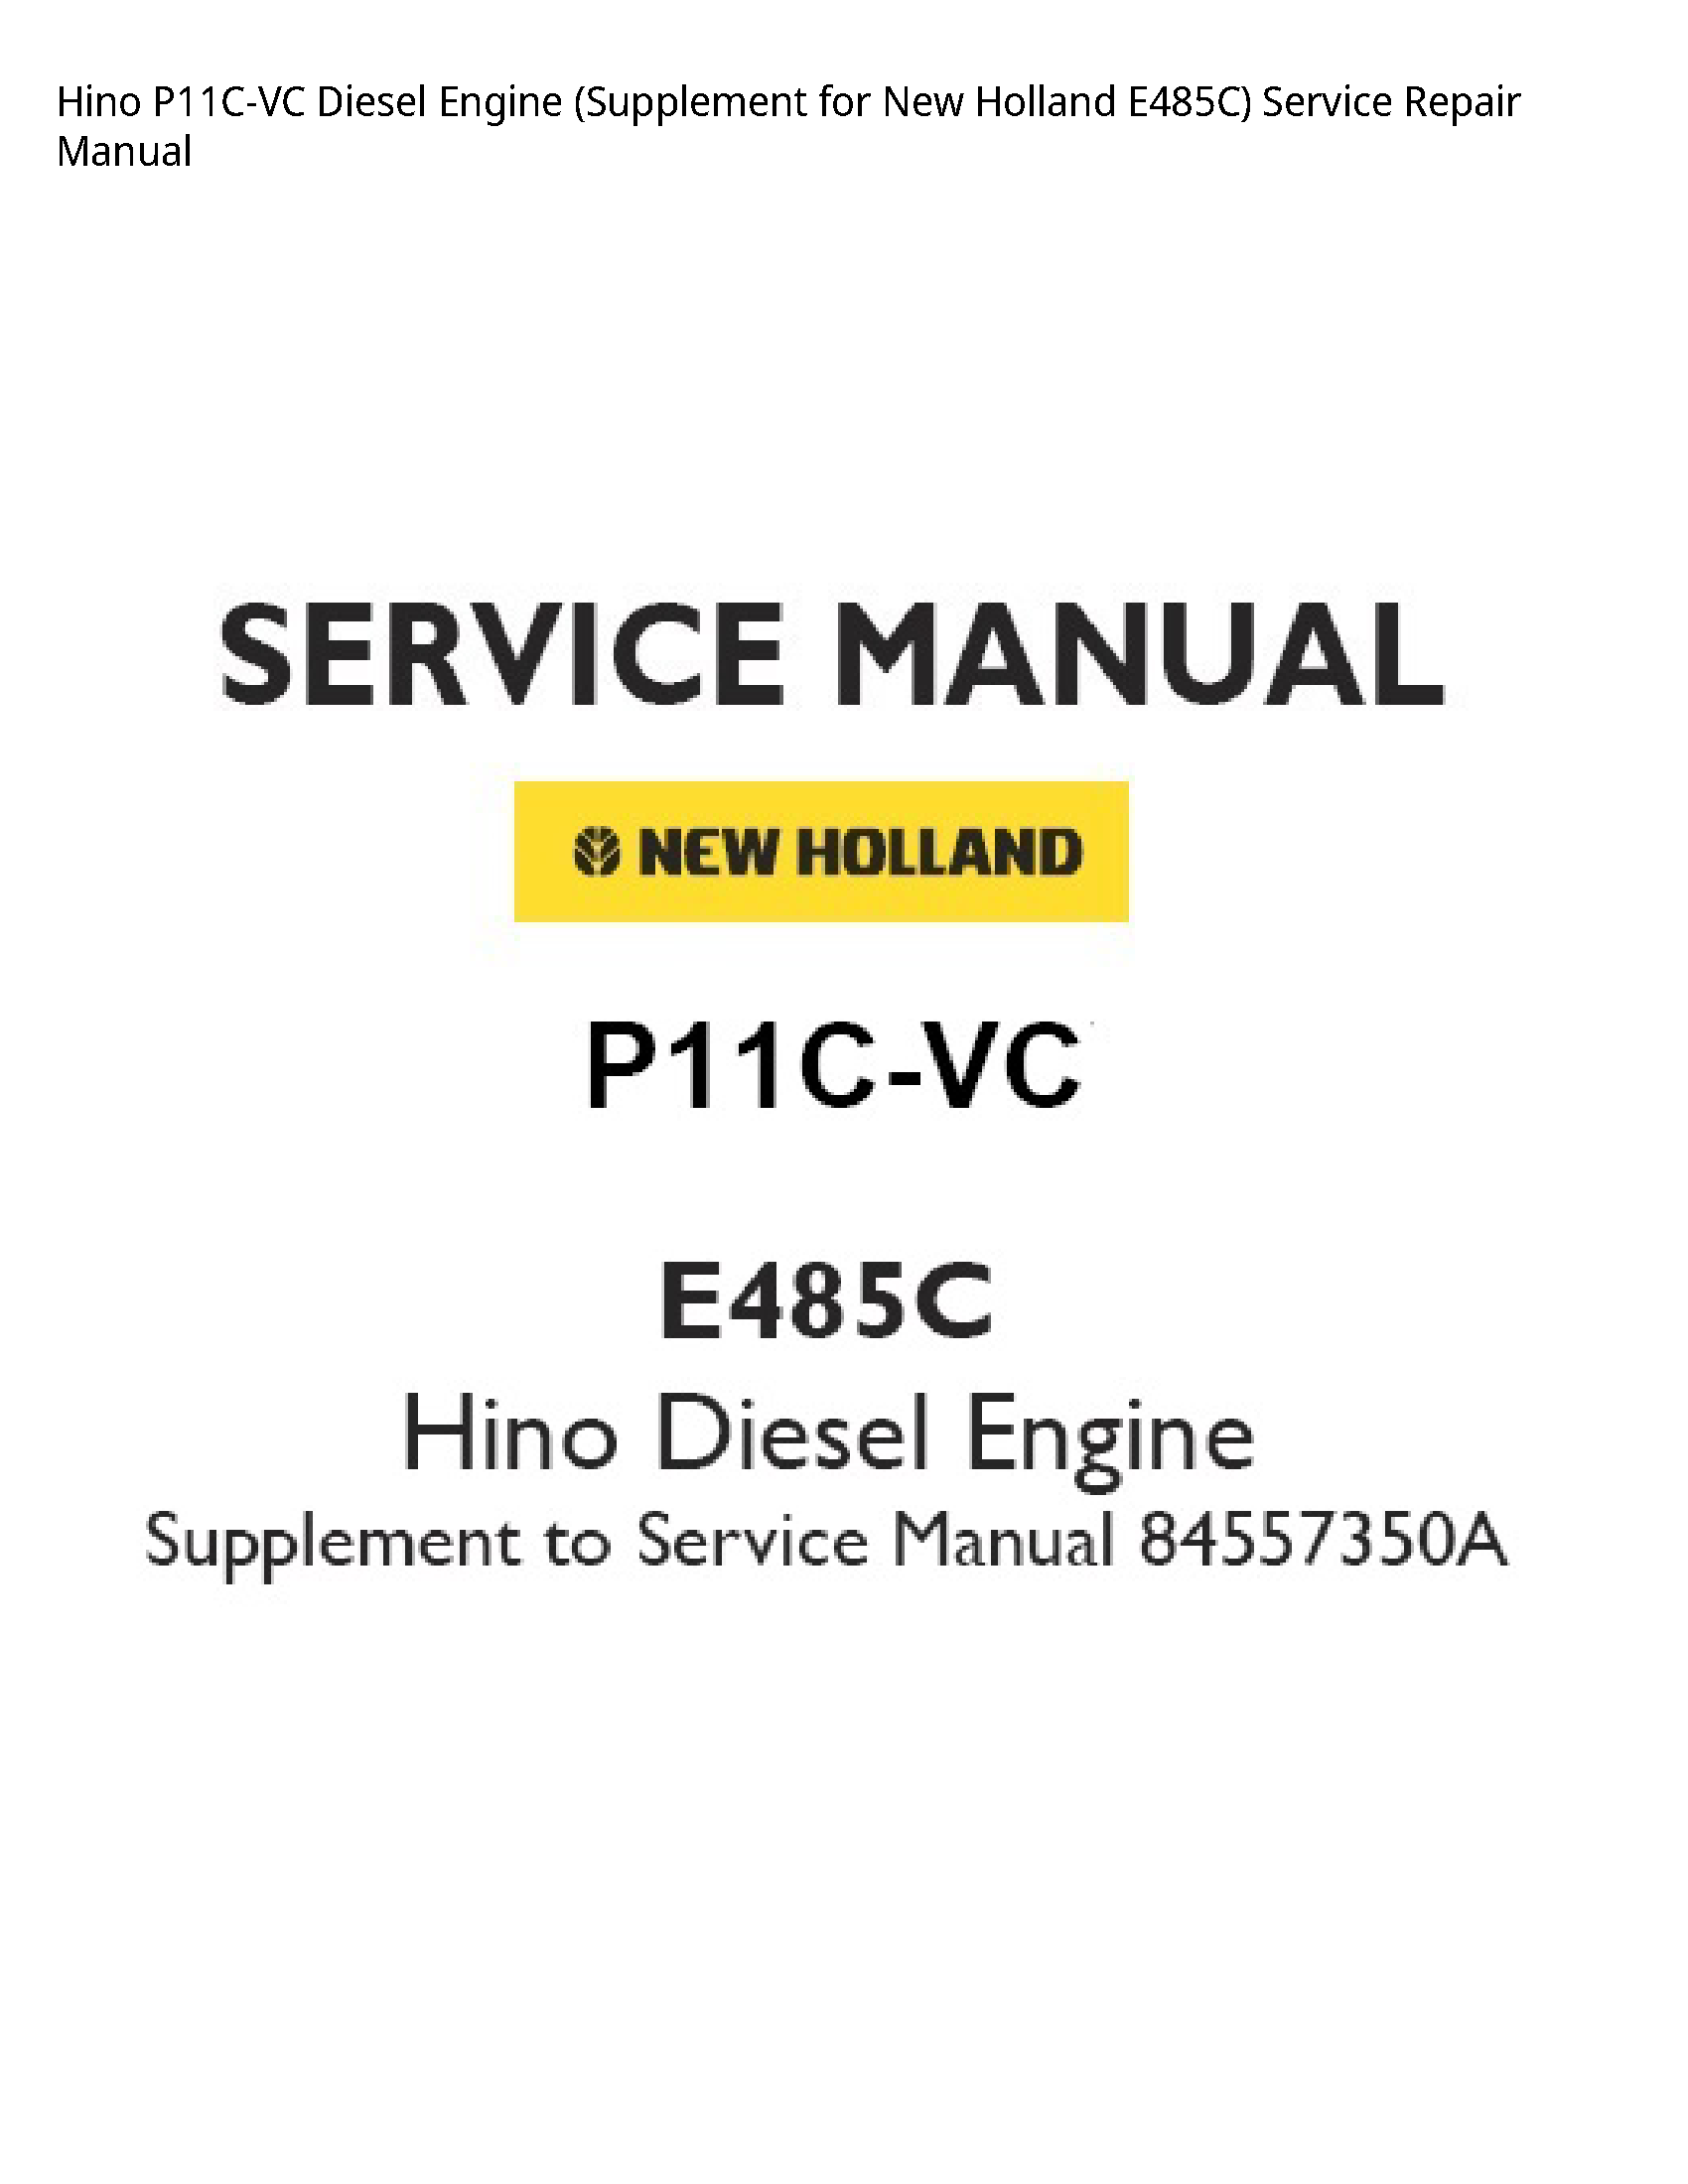 Hino P11C-VC Diesel Engine Supplement for New Holland manual